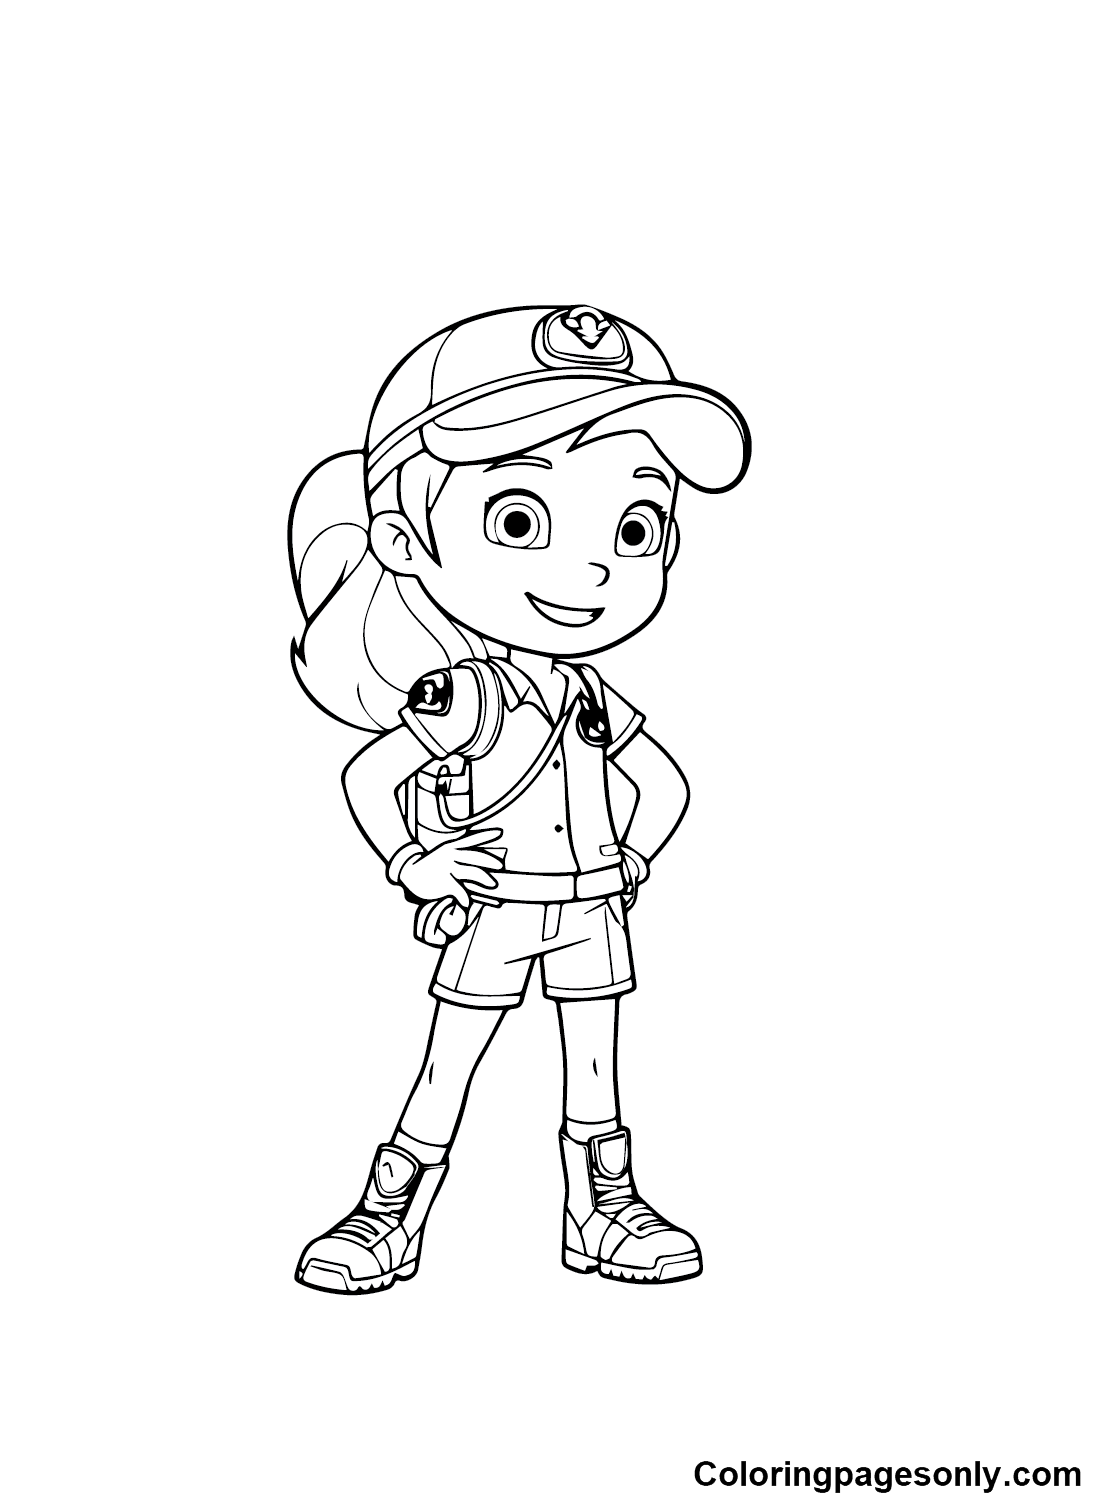 Print Rainbow Rangers Coloring Page